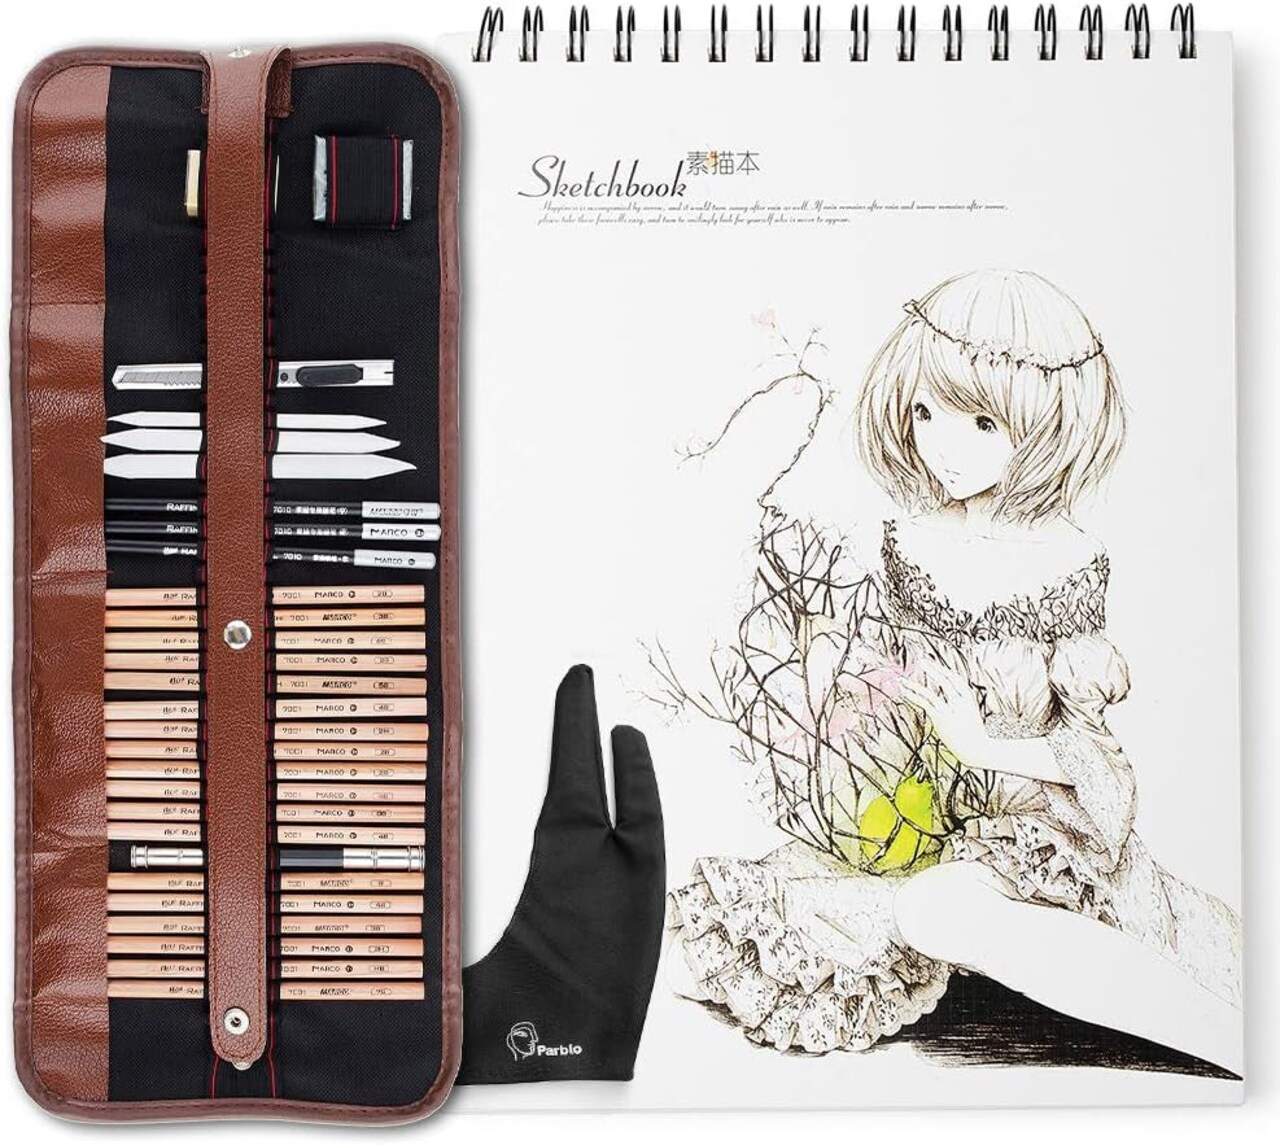 29 Pieces Professional Sketch & Drawing Art Tool Kit with Graphite Pencils,  Charcoal Pencils, Paper Erasable Pen, Craft Knife- (Without Sketchbook,  with Zipper Case)